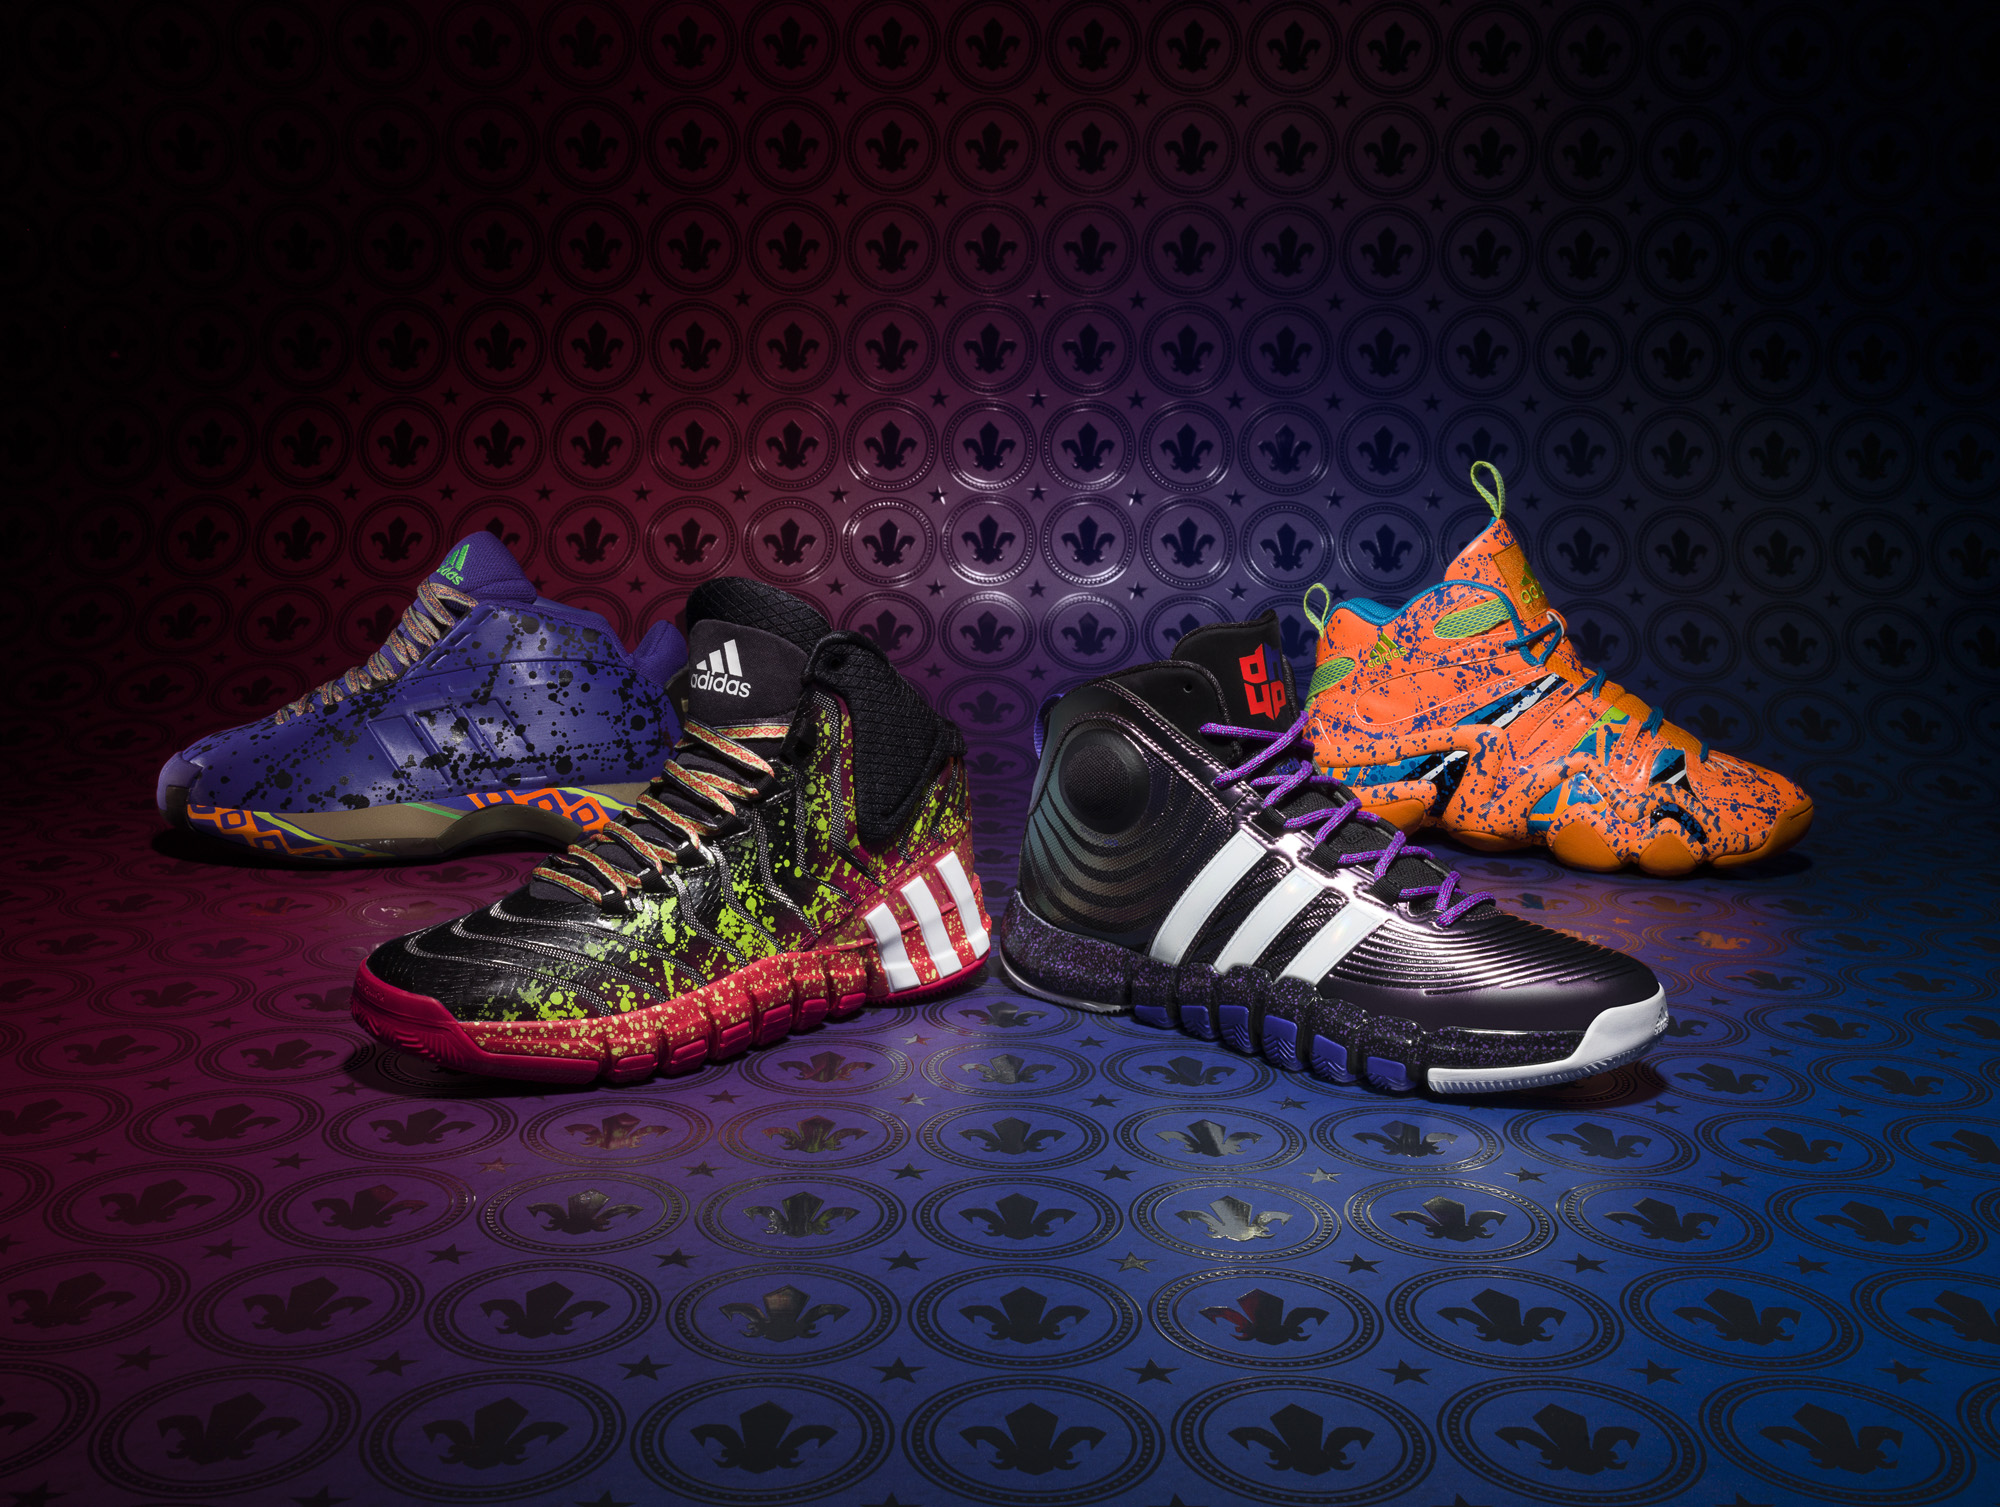 Adidas Basketball Debuts 2014 NBA All-Star Footwear Collection | The Source